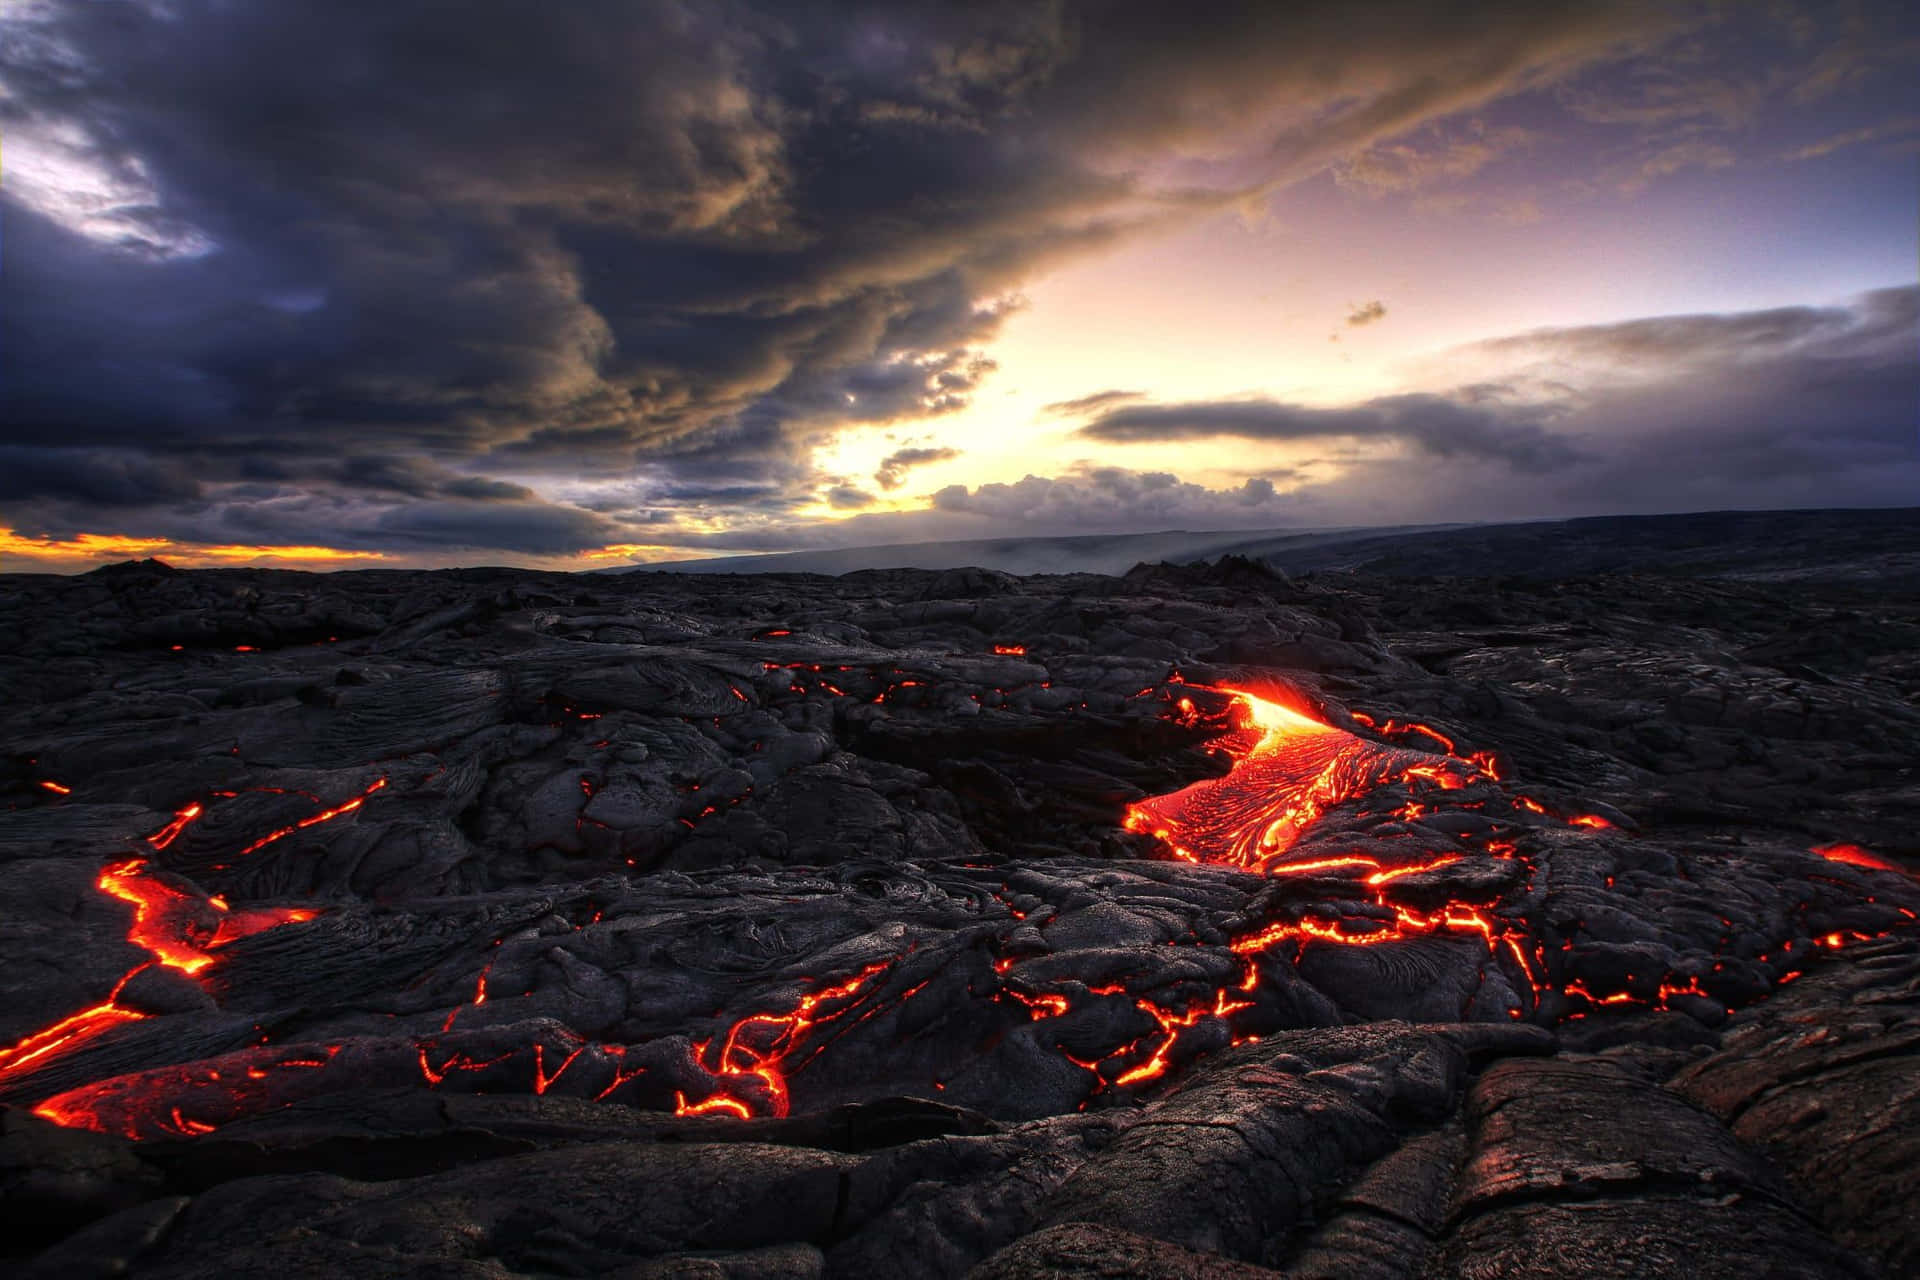 Lava flows from an erupting volcano